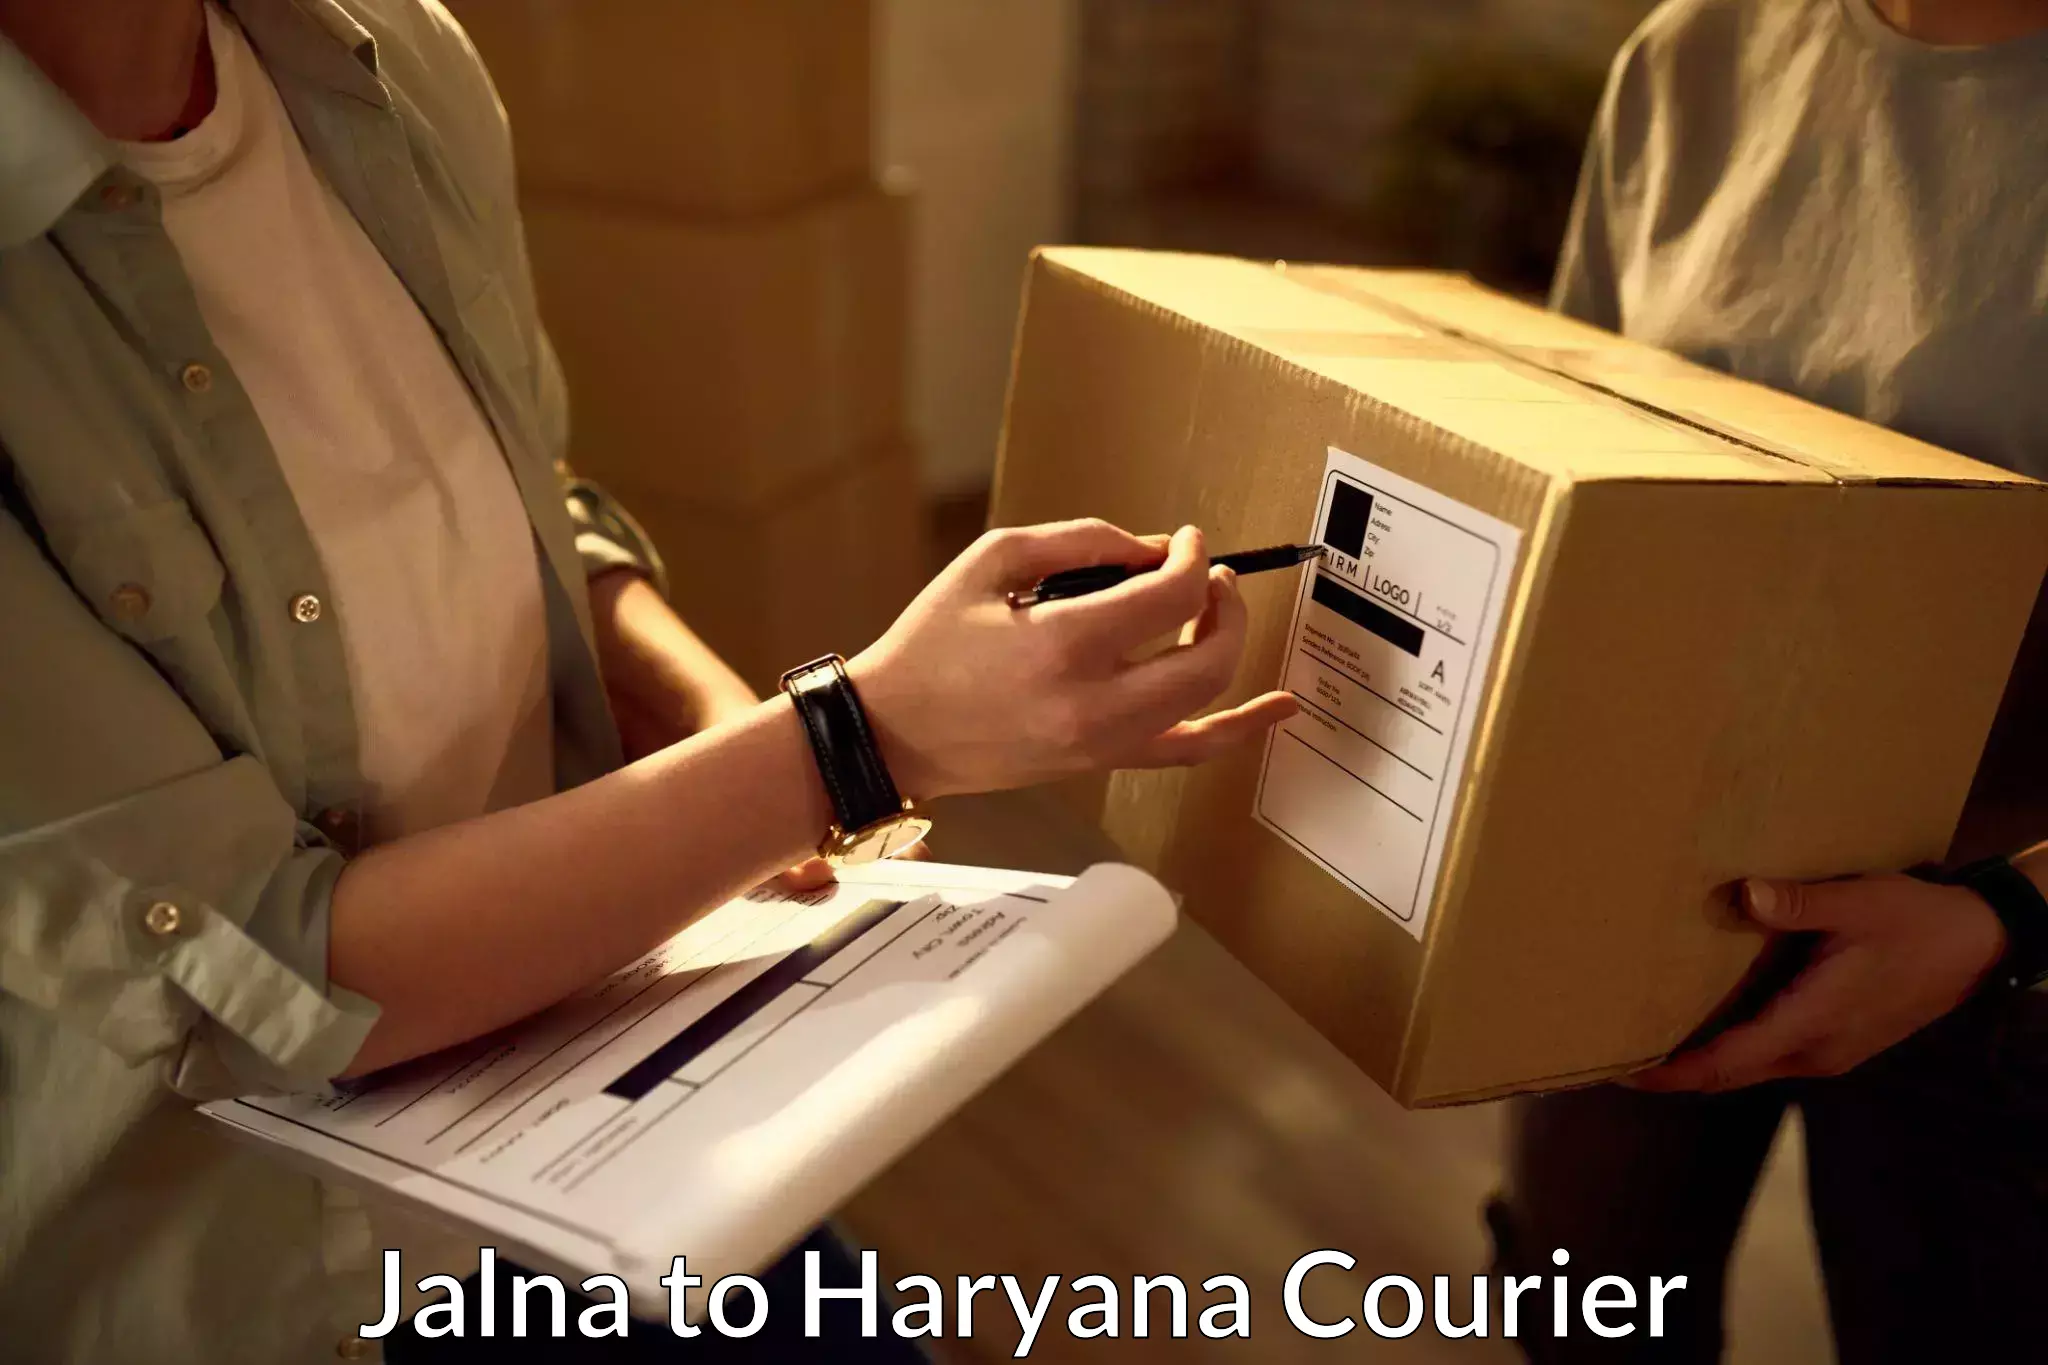 Efficient order fulfillment in Jalna to Odhan